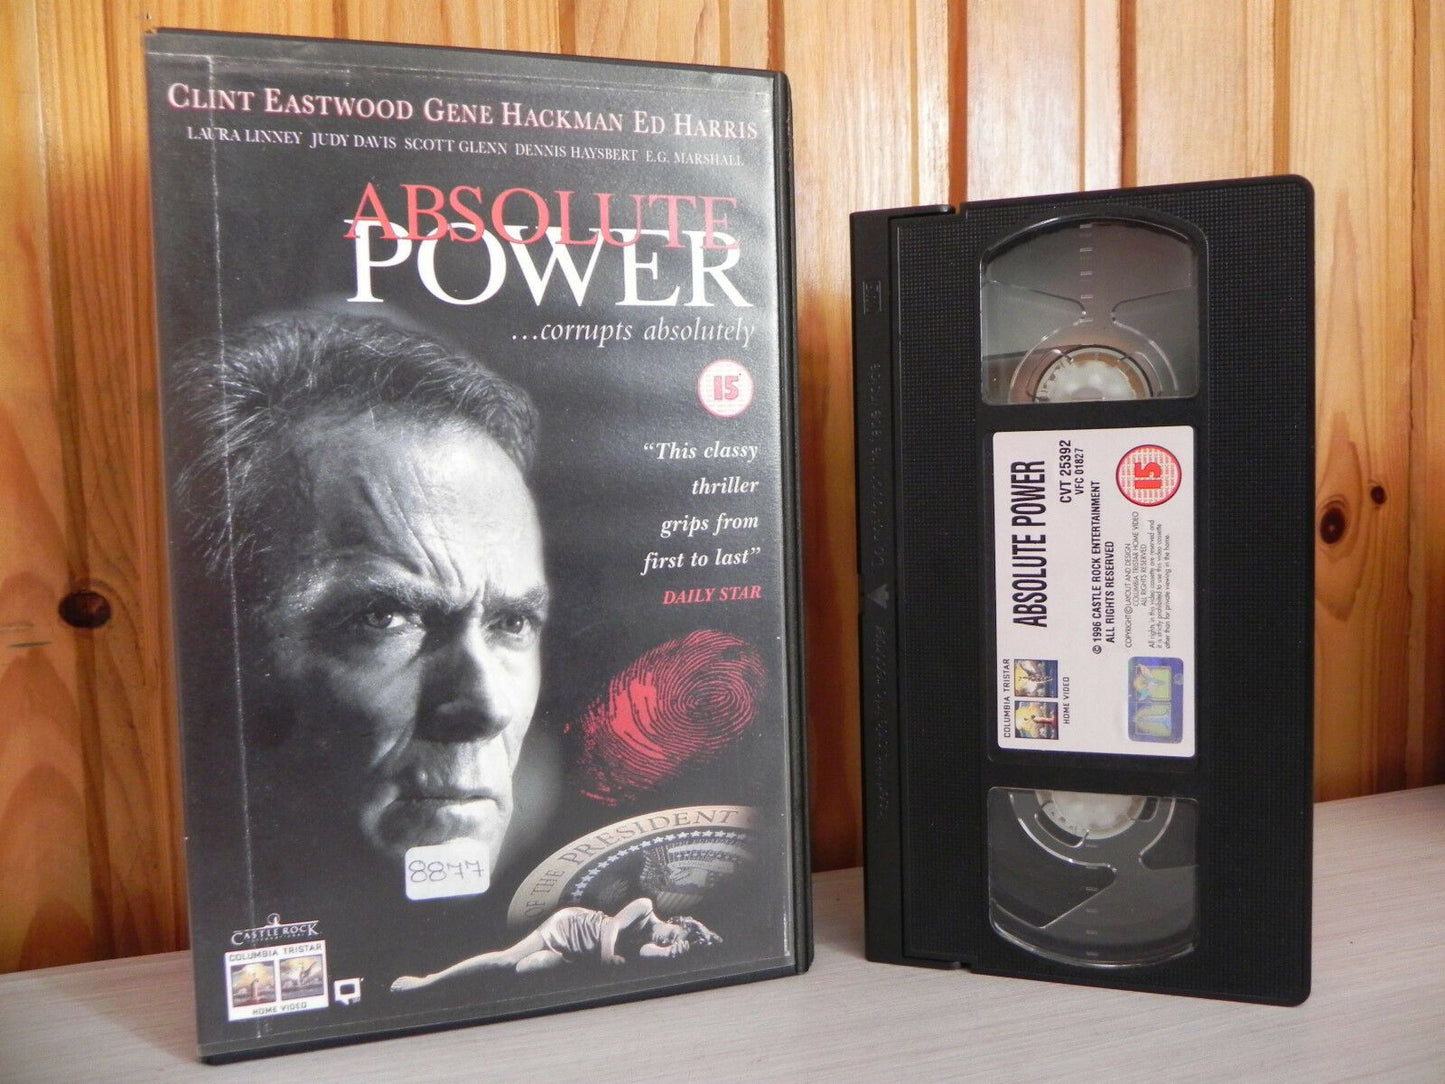 Absolute Power - Clint Eastwood - Big Ex-Rental - Drama Come Thriller - 1996 VHS-